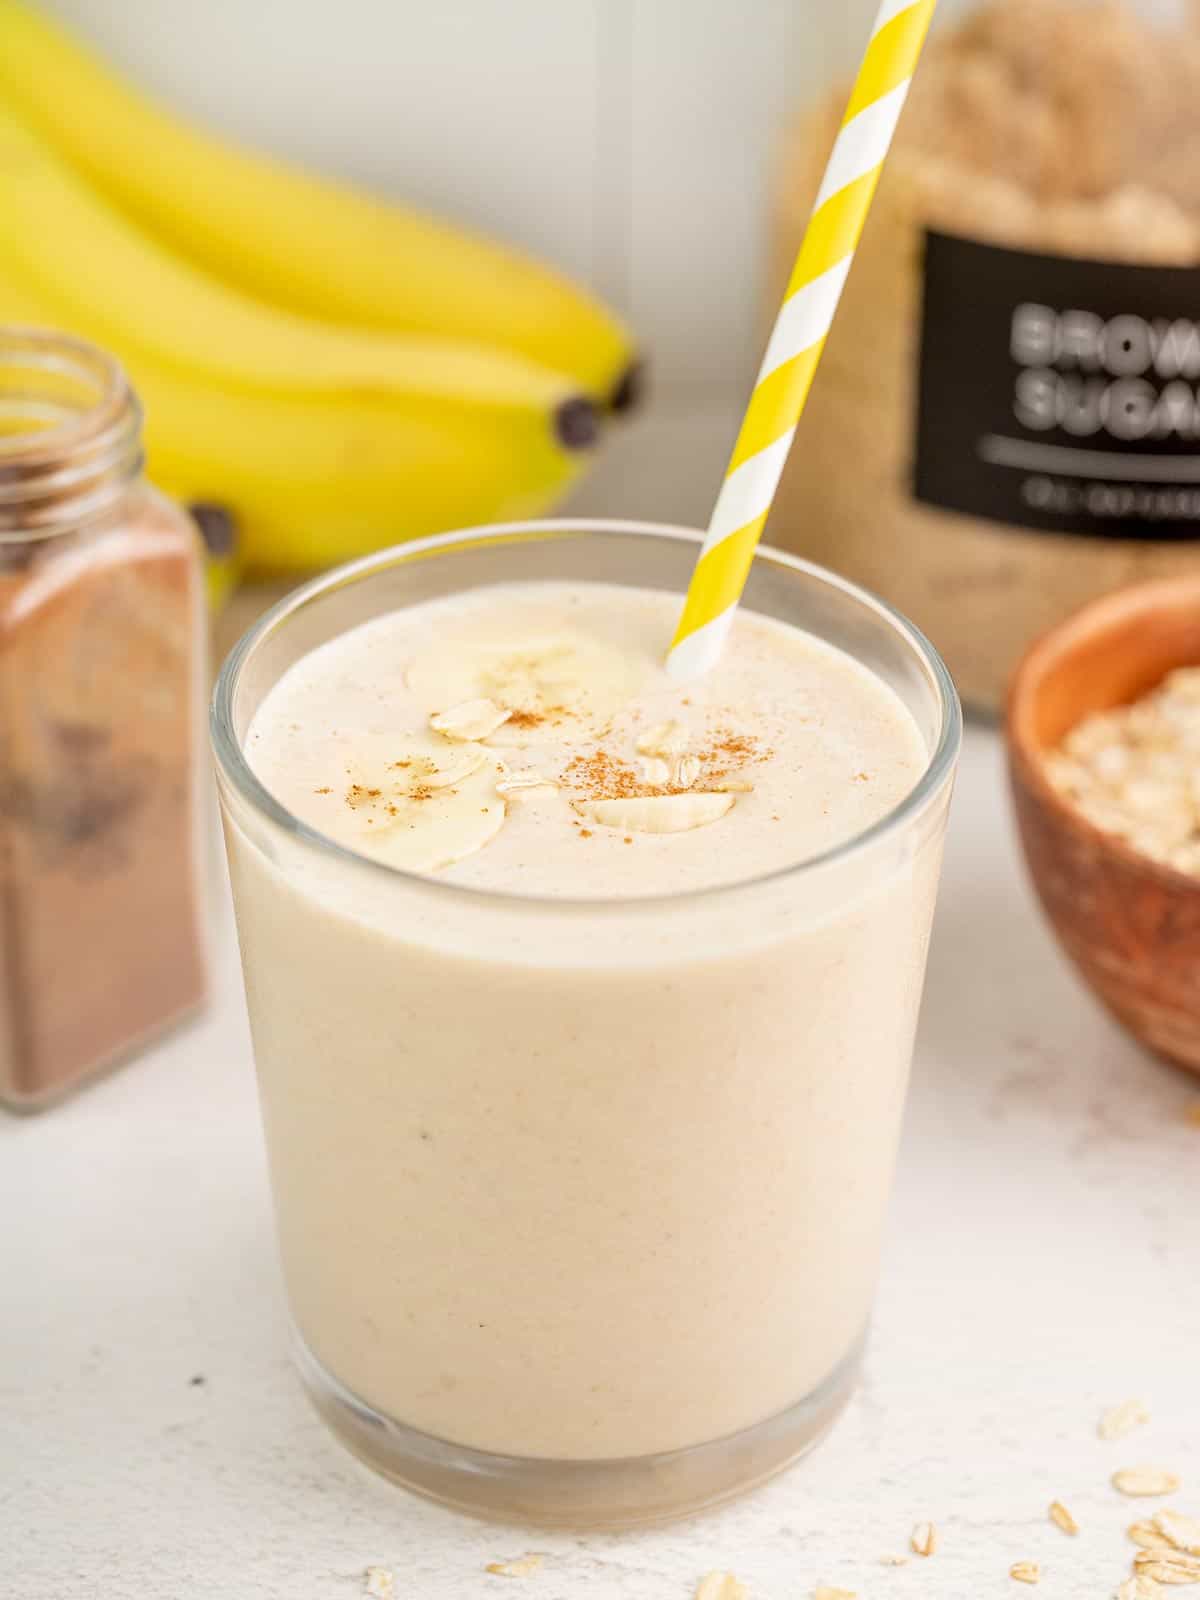 Peanut butter banana smoothie in a glass with a yellow striped straw.